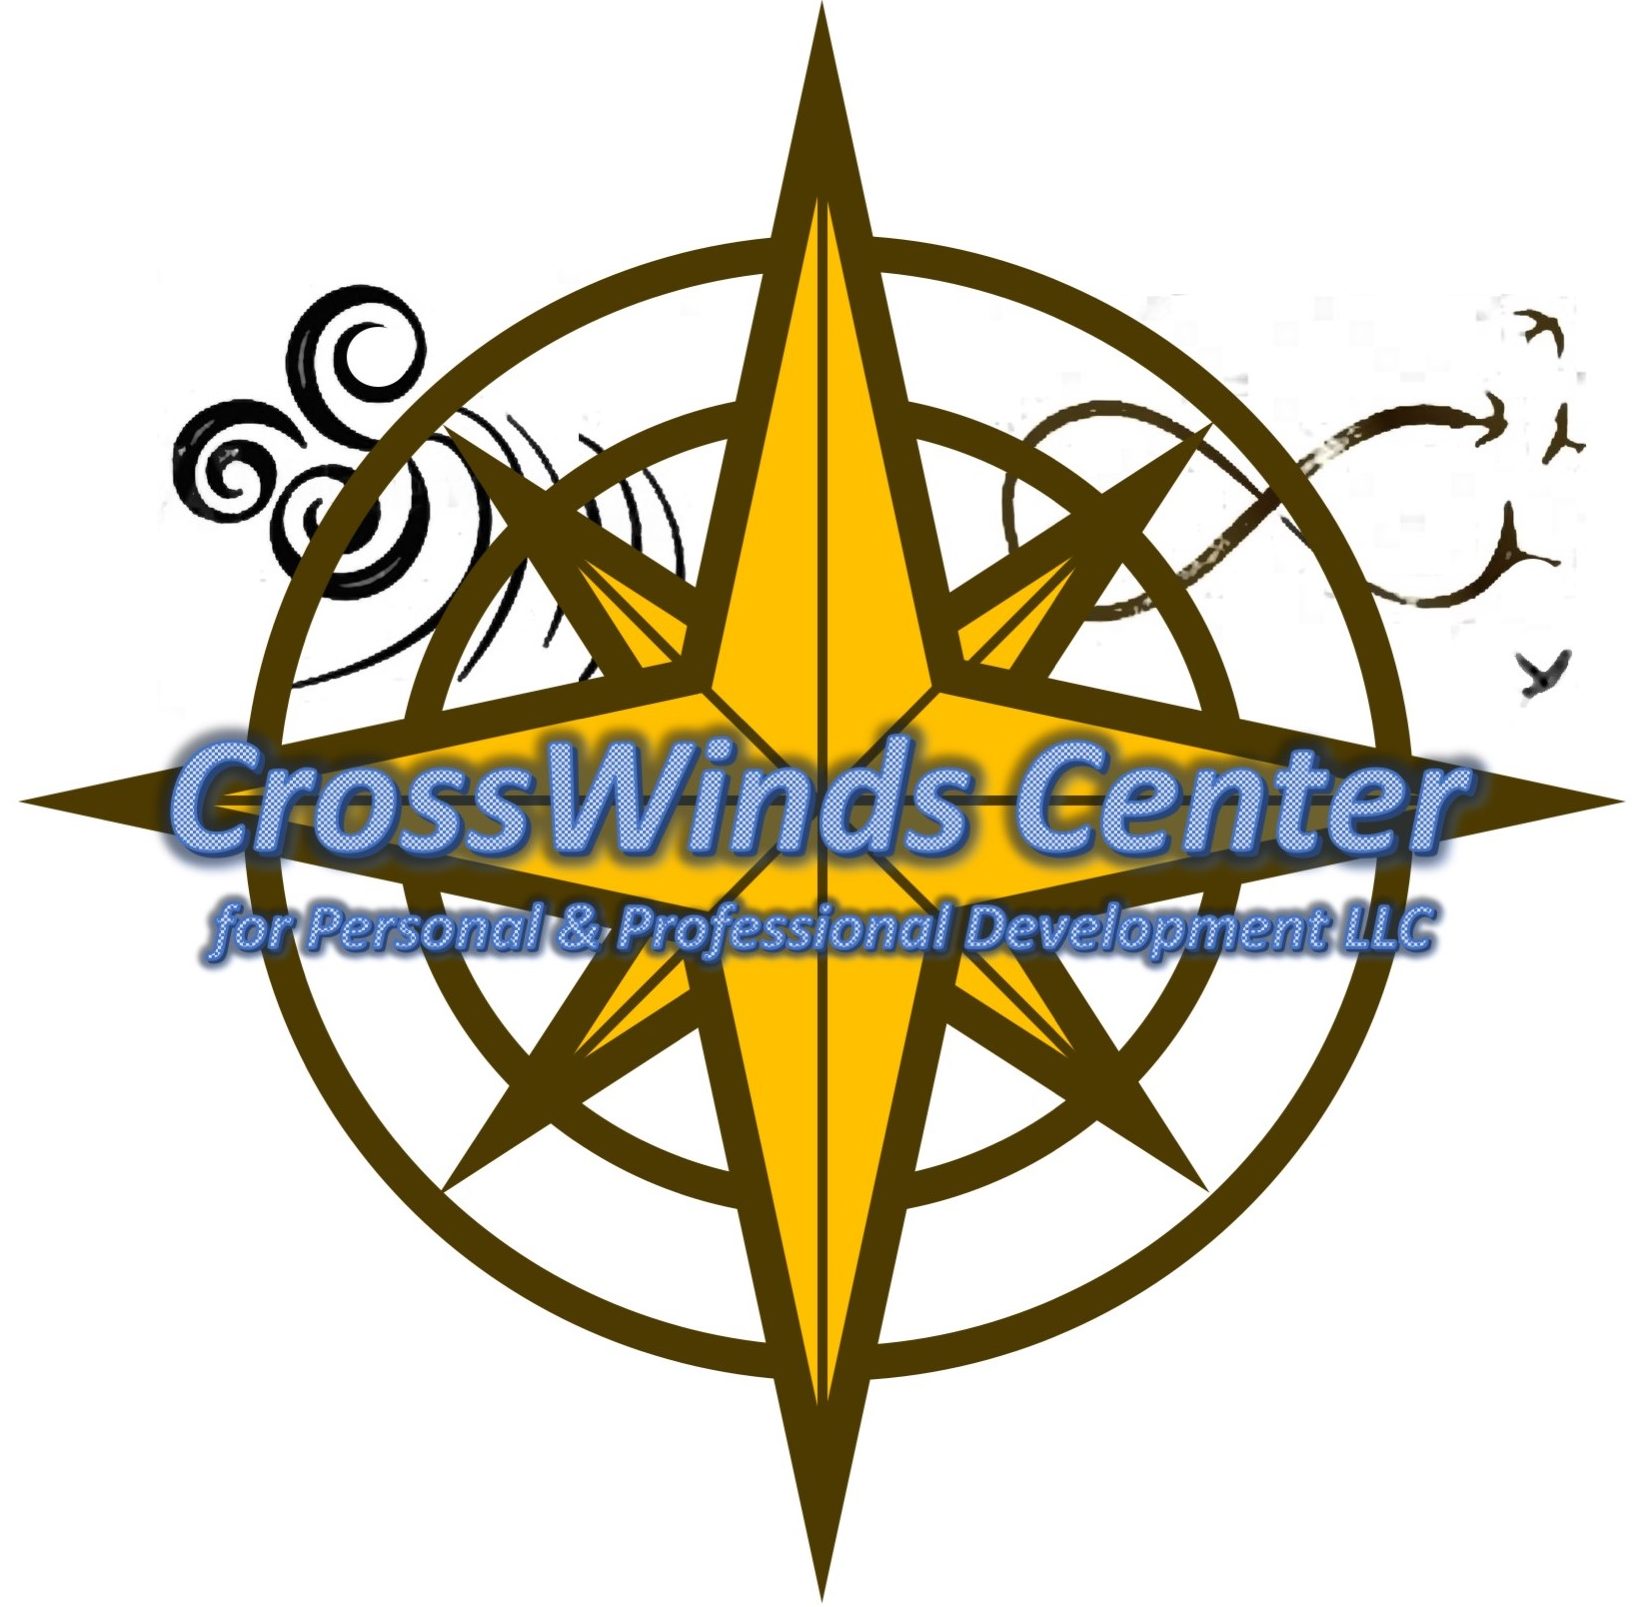 About Us Crosswinds Center for Personal and Professional Development, LLC